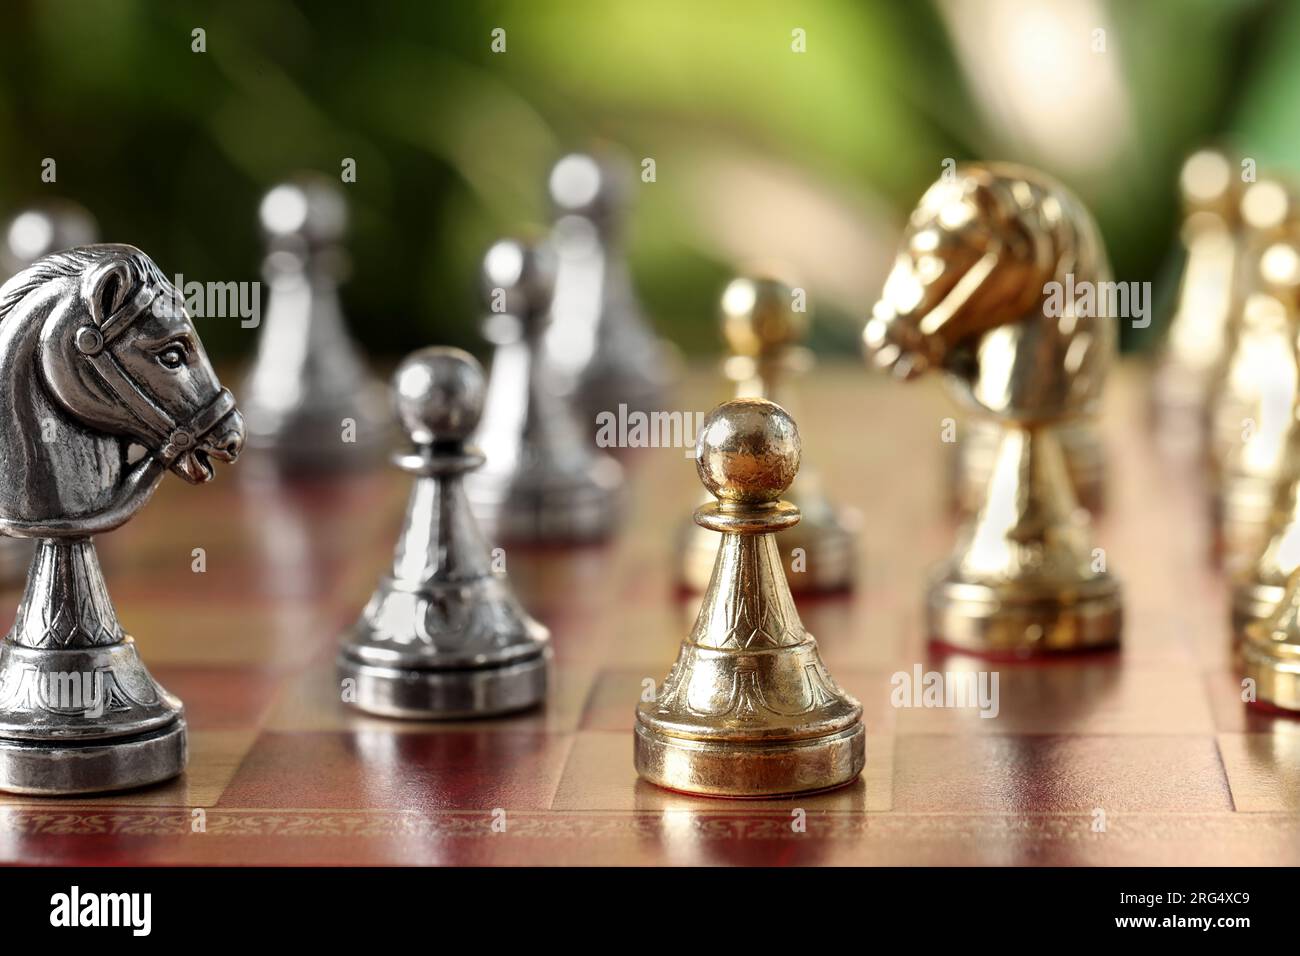 Golden pawn and silver knight on chess board against blurred background, closeup Stock Photo